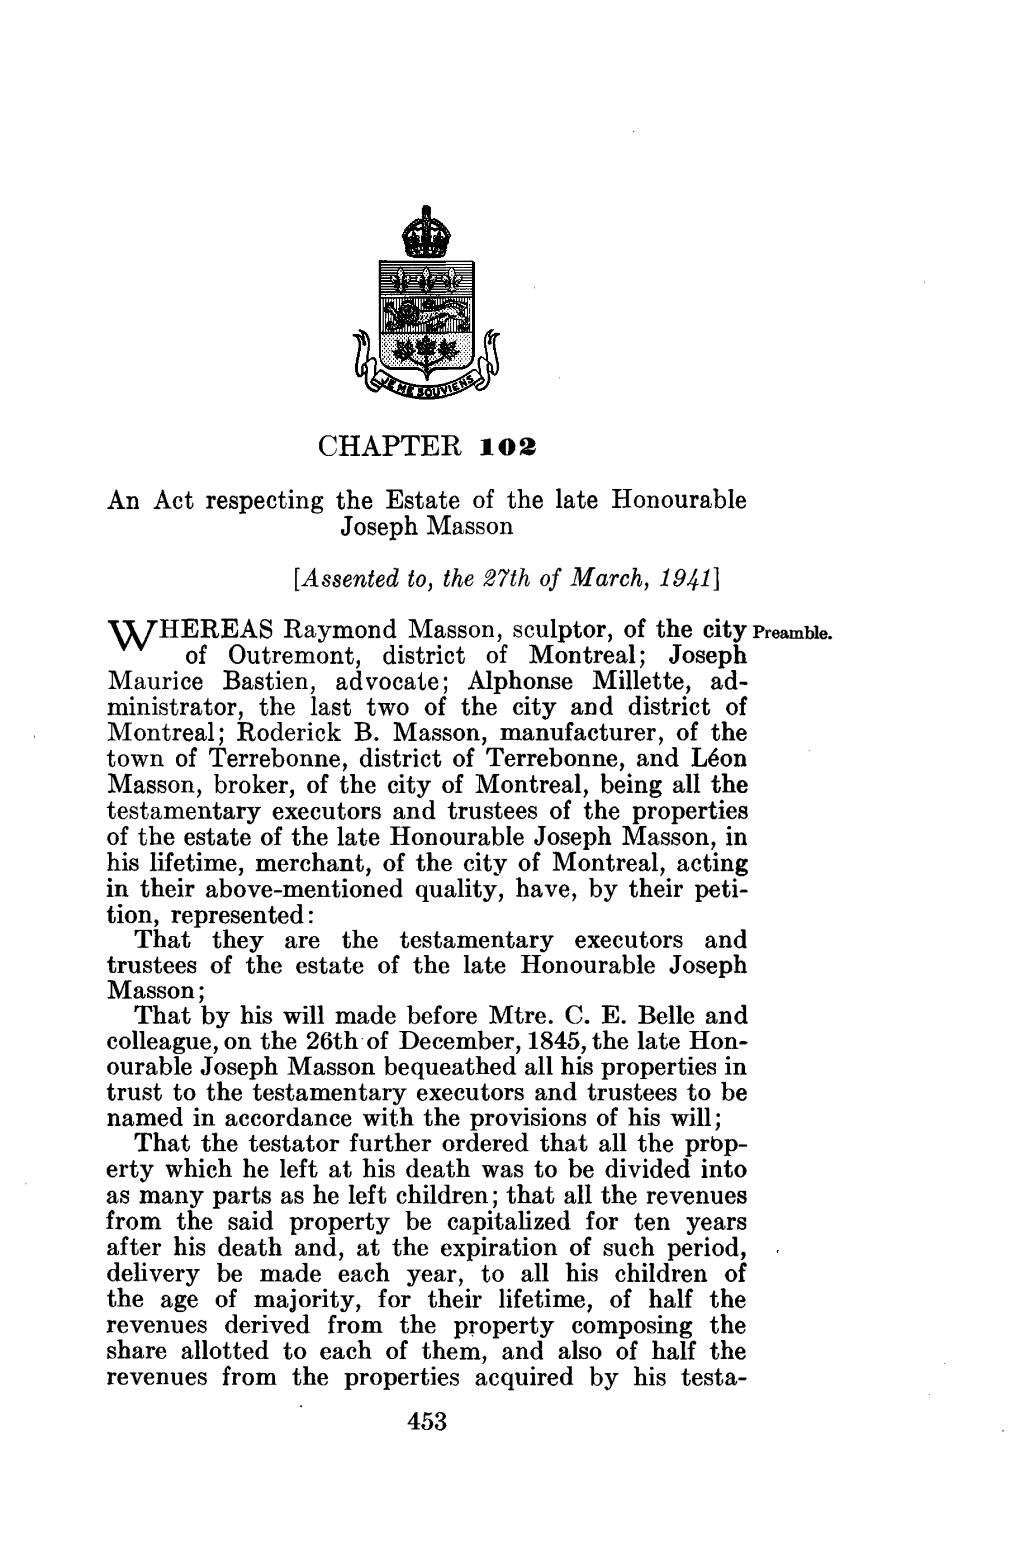 CHAPTER 102 an Act Respecting the Estate of the Late Honourable